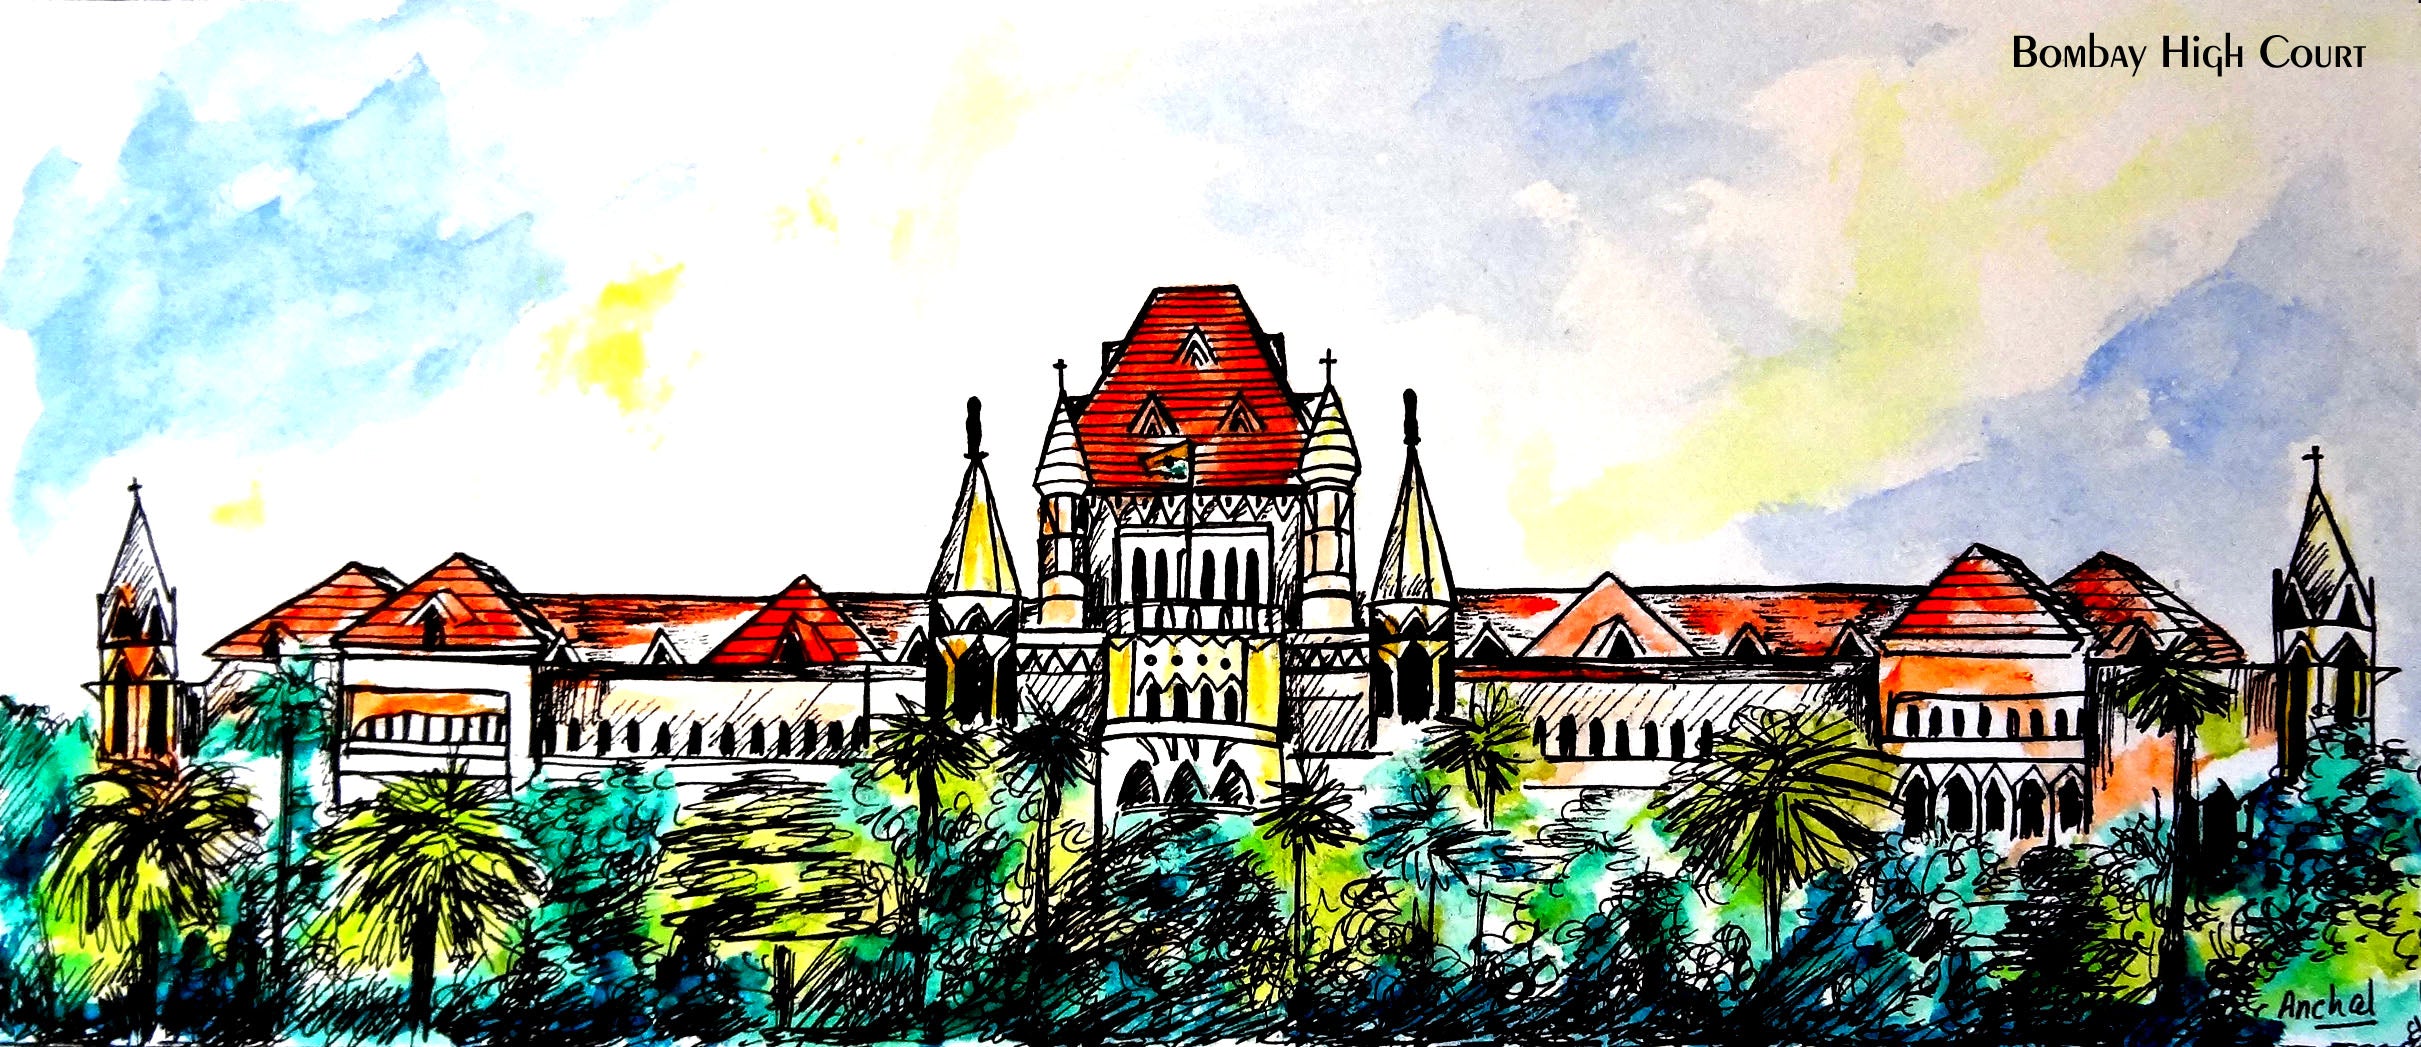 Bombay High Court Color Print 